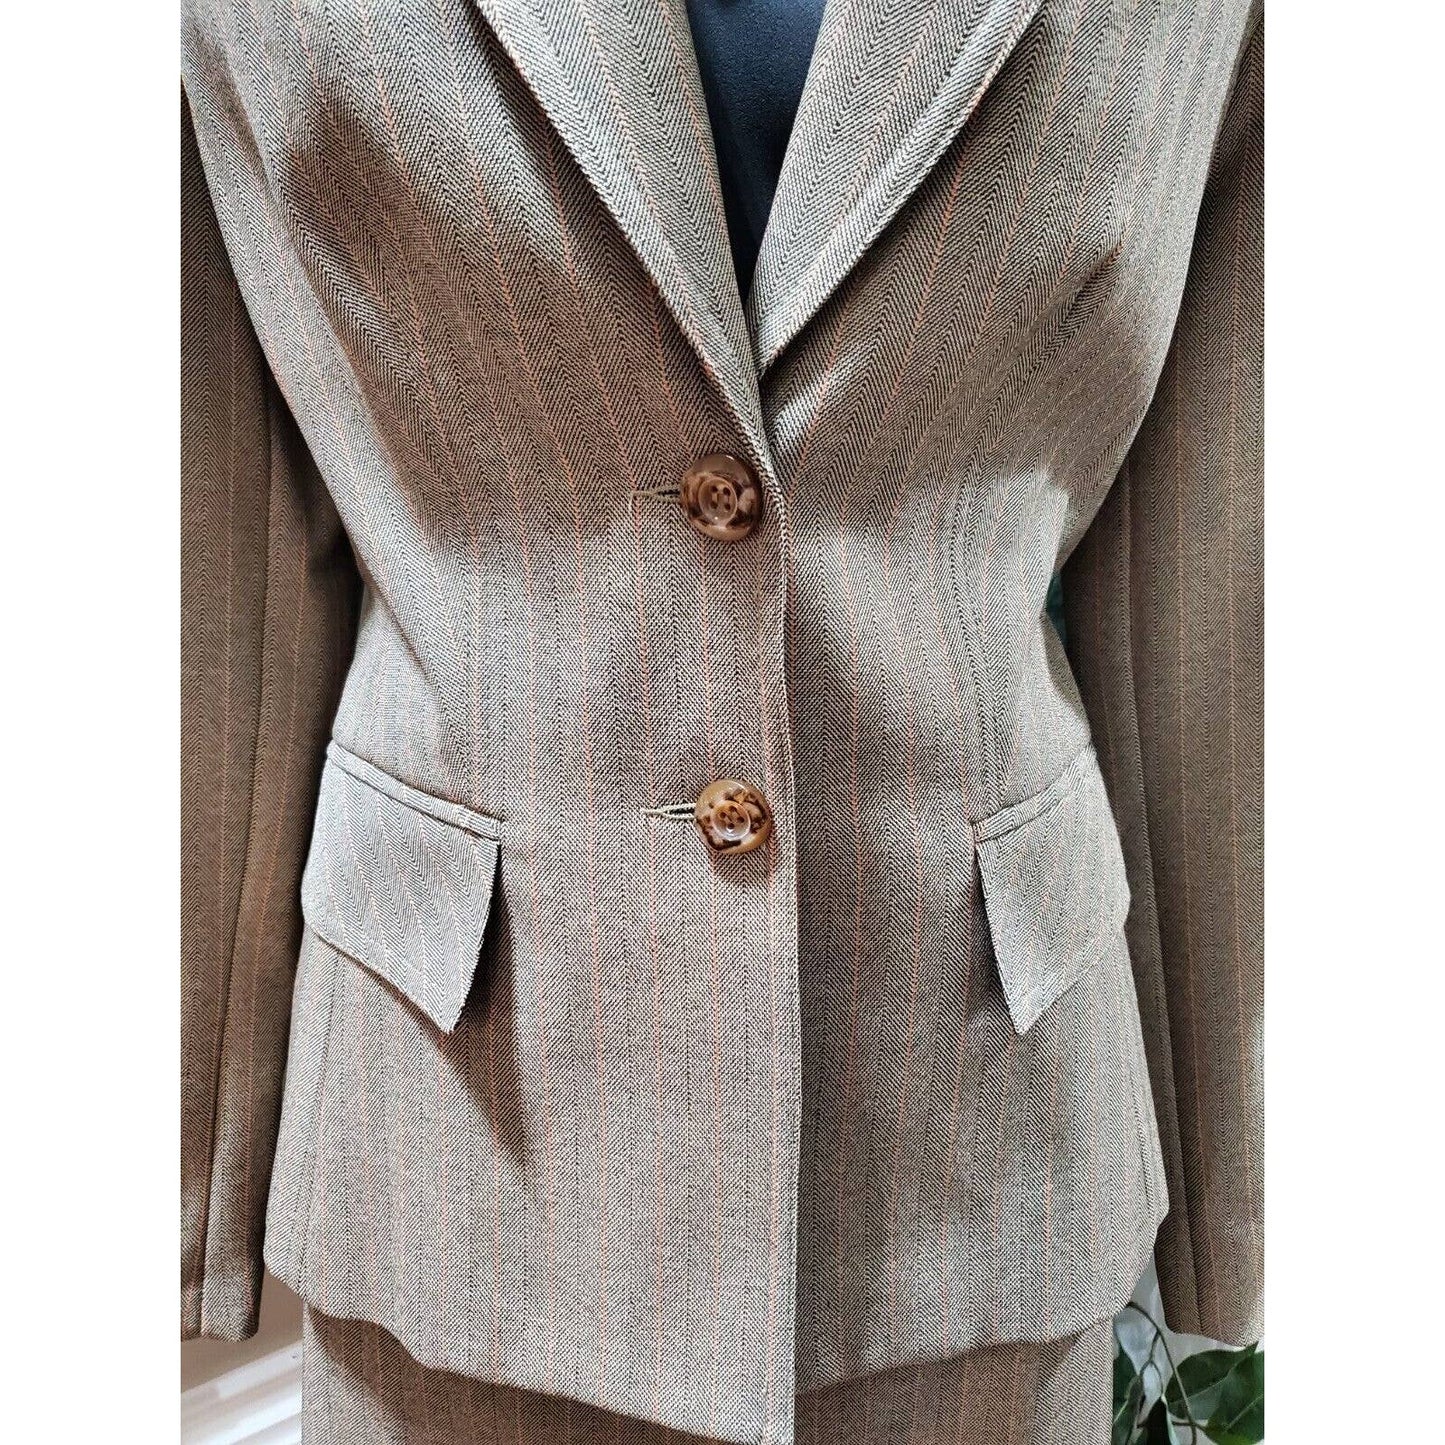 Giorgio Sant'Angelo Women Brown Single Breasted Blazer & Skirt 2 Pc's Suit 8